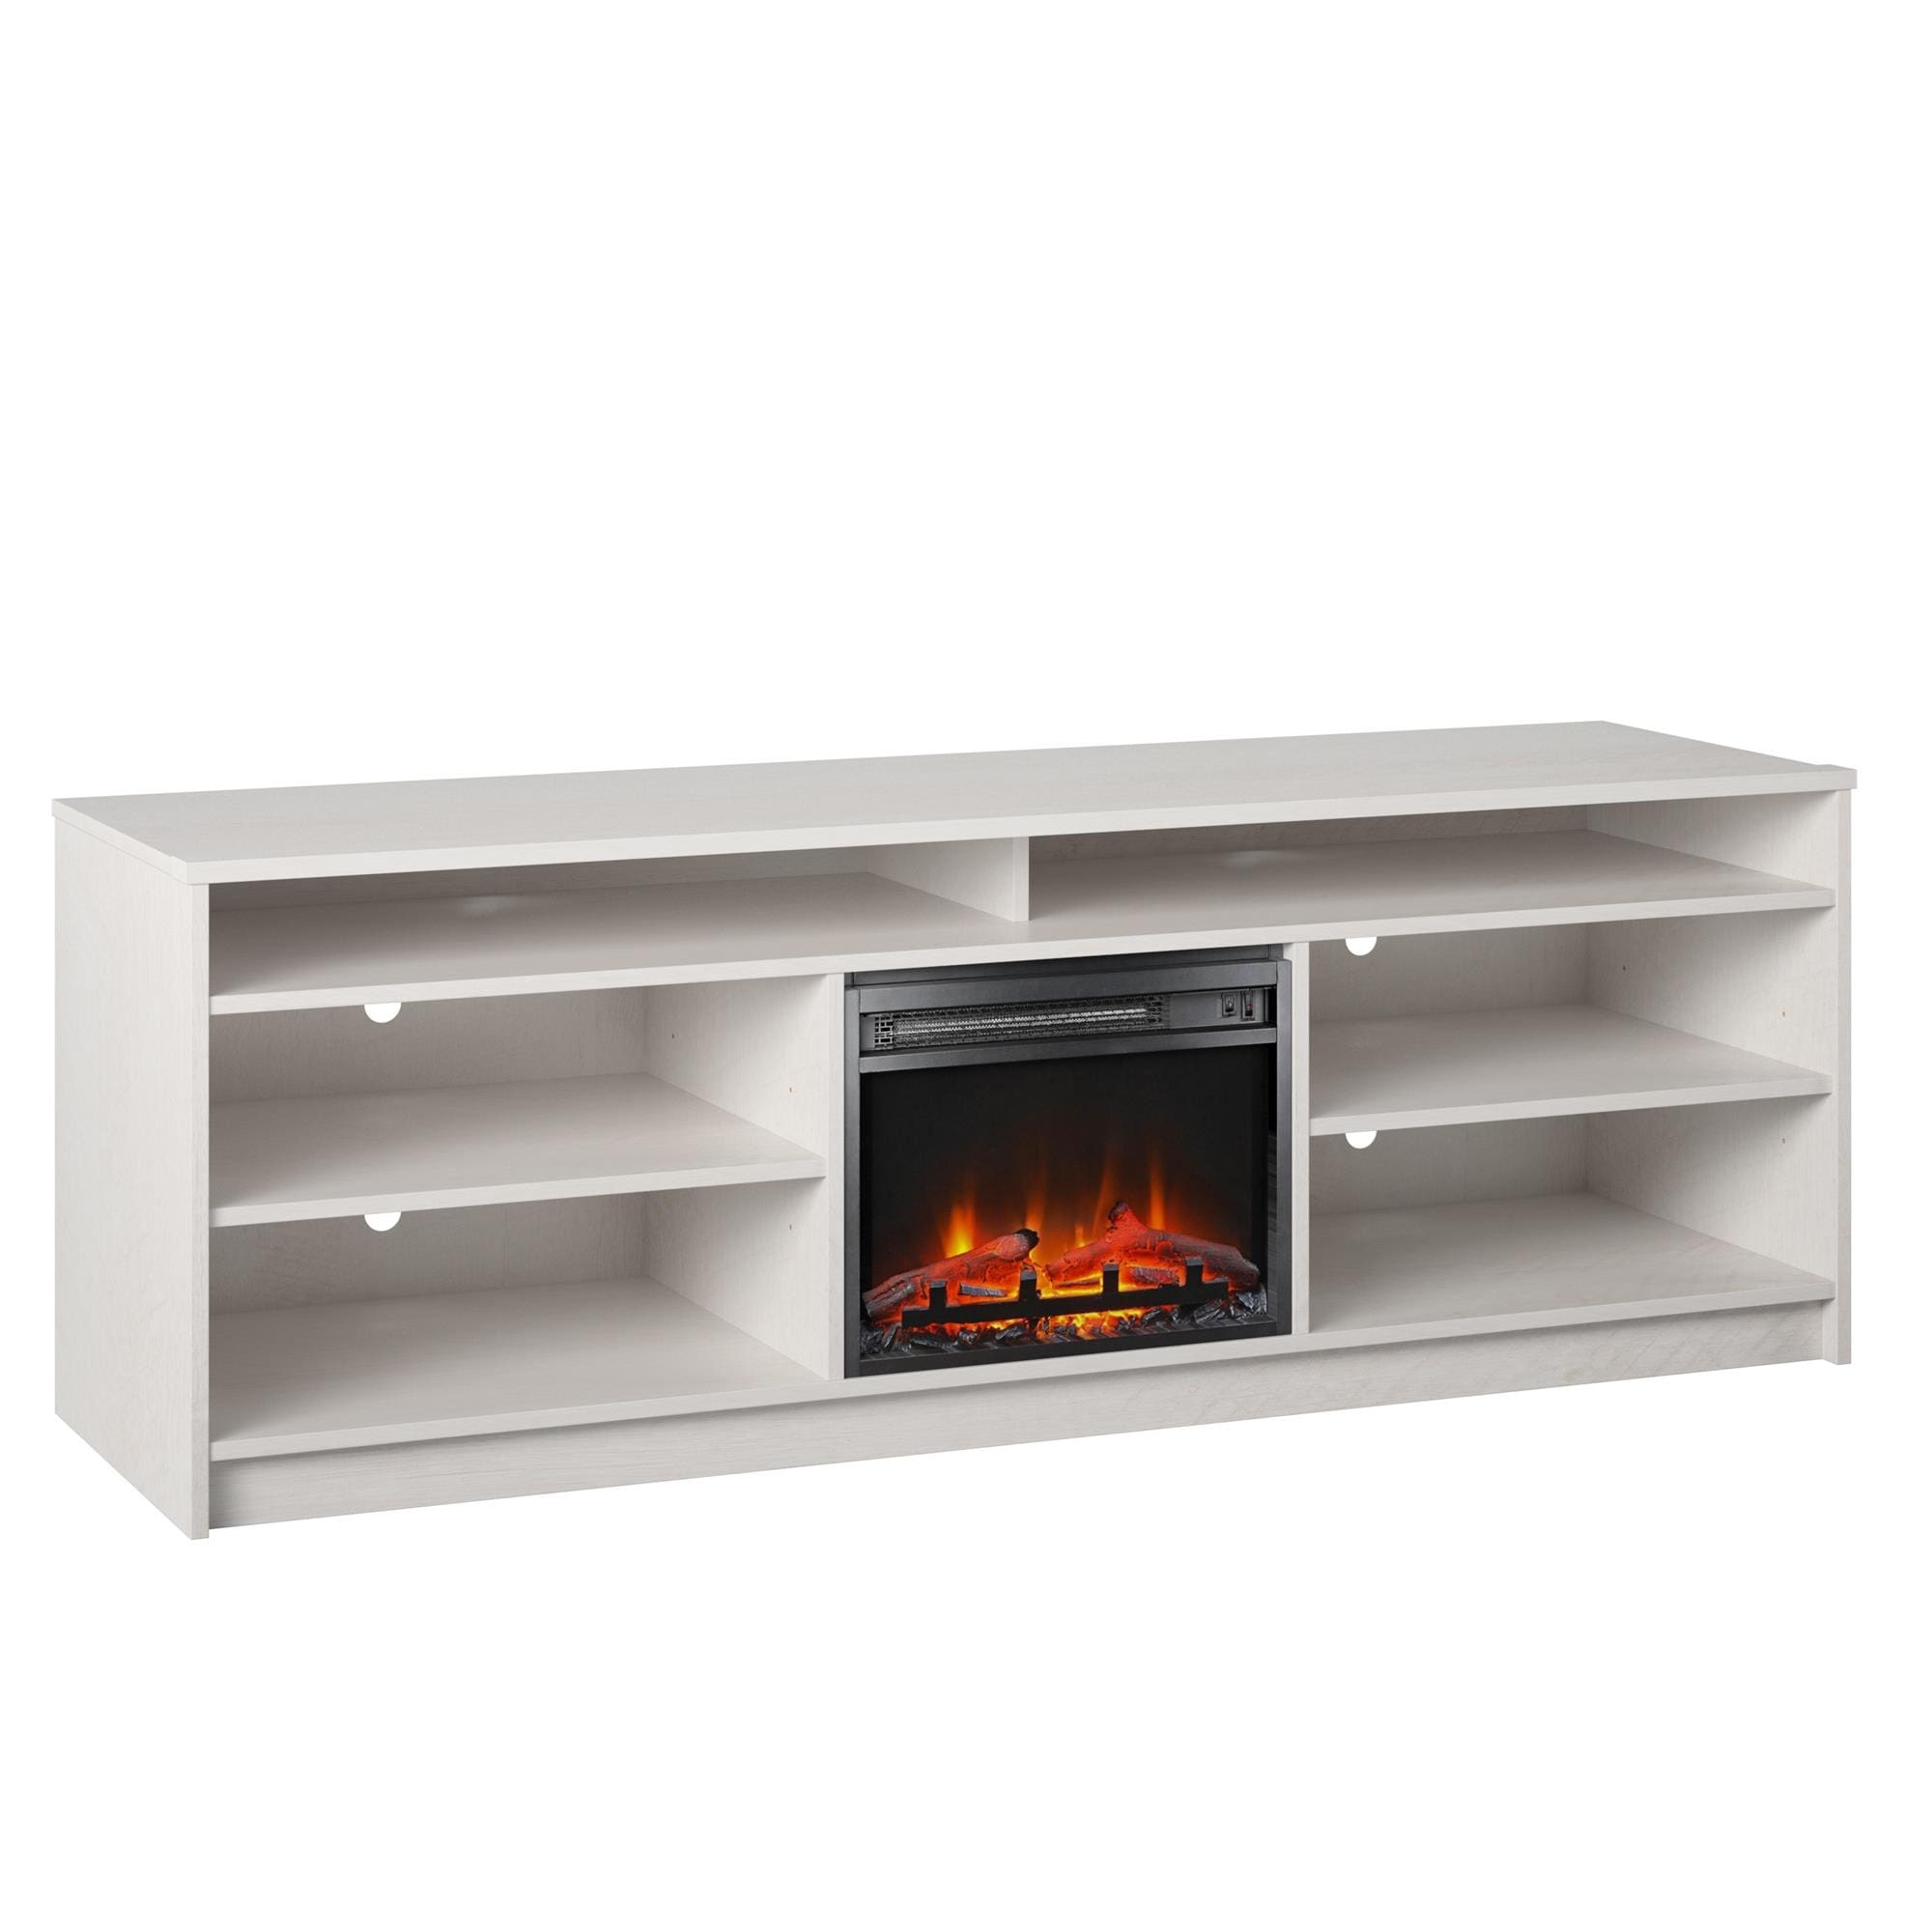 Ameriwood Home Hickory Hill 75-inch TV Stand with Electric Fireplace Insert and 6 Shelves